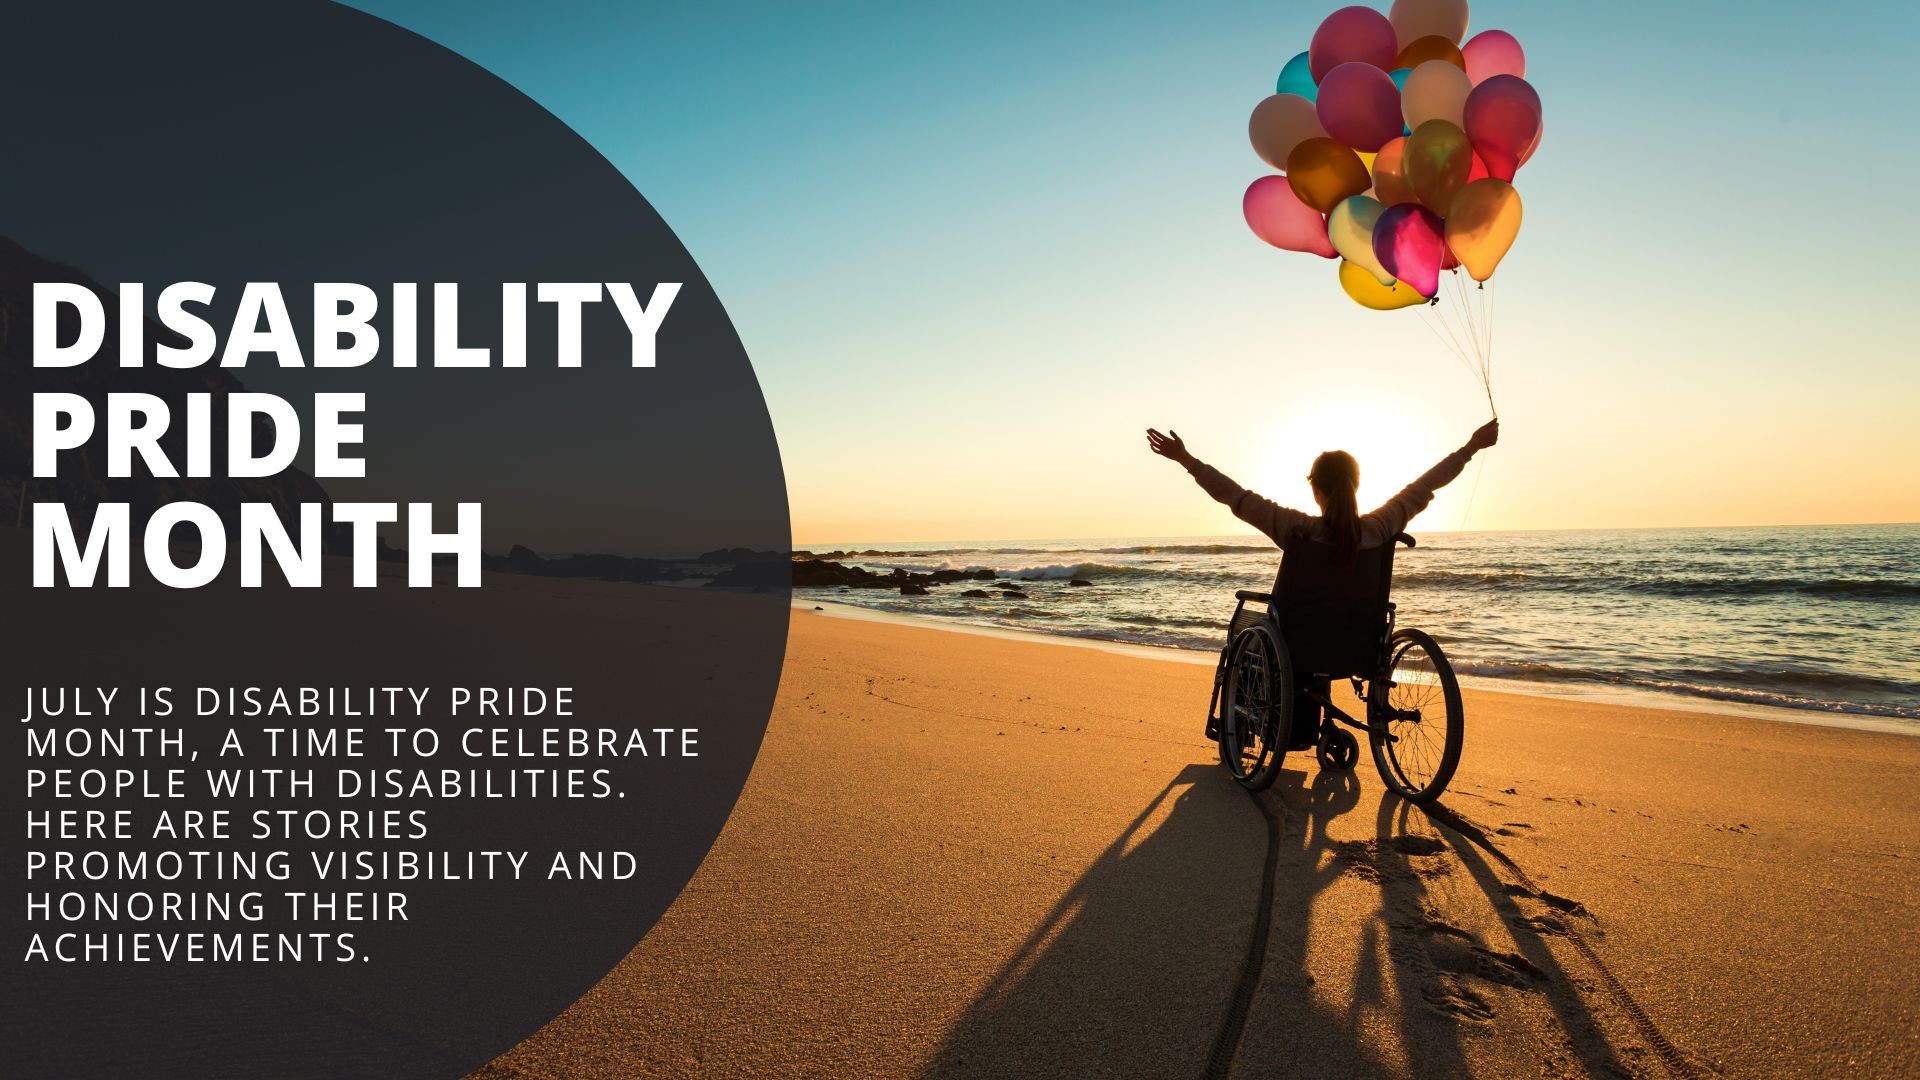 July is disability pride month, a time to celebrate people with disabilities. Here are stories promoting visibility and honoring their achievements.